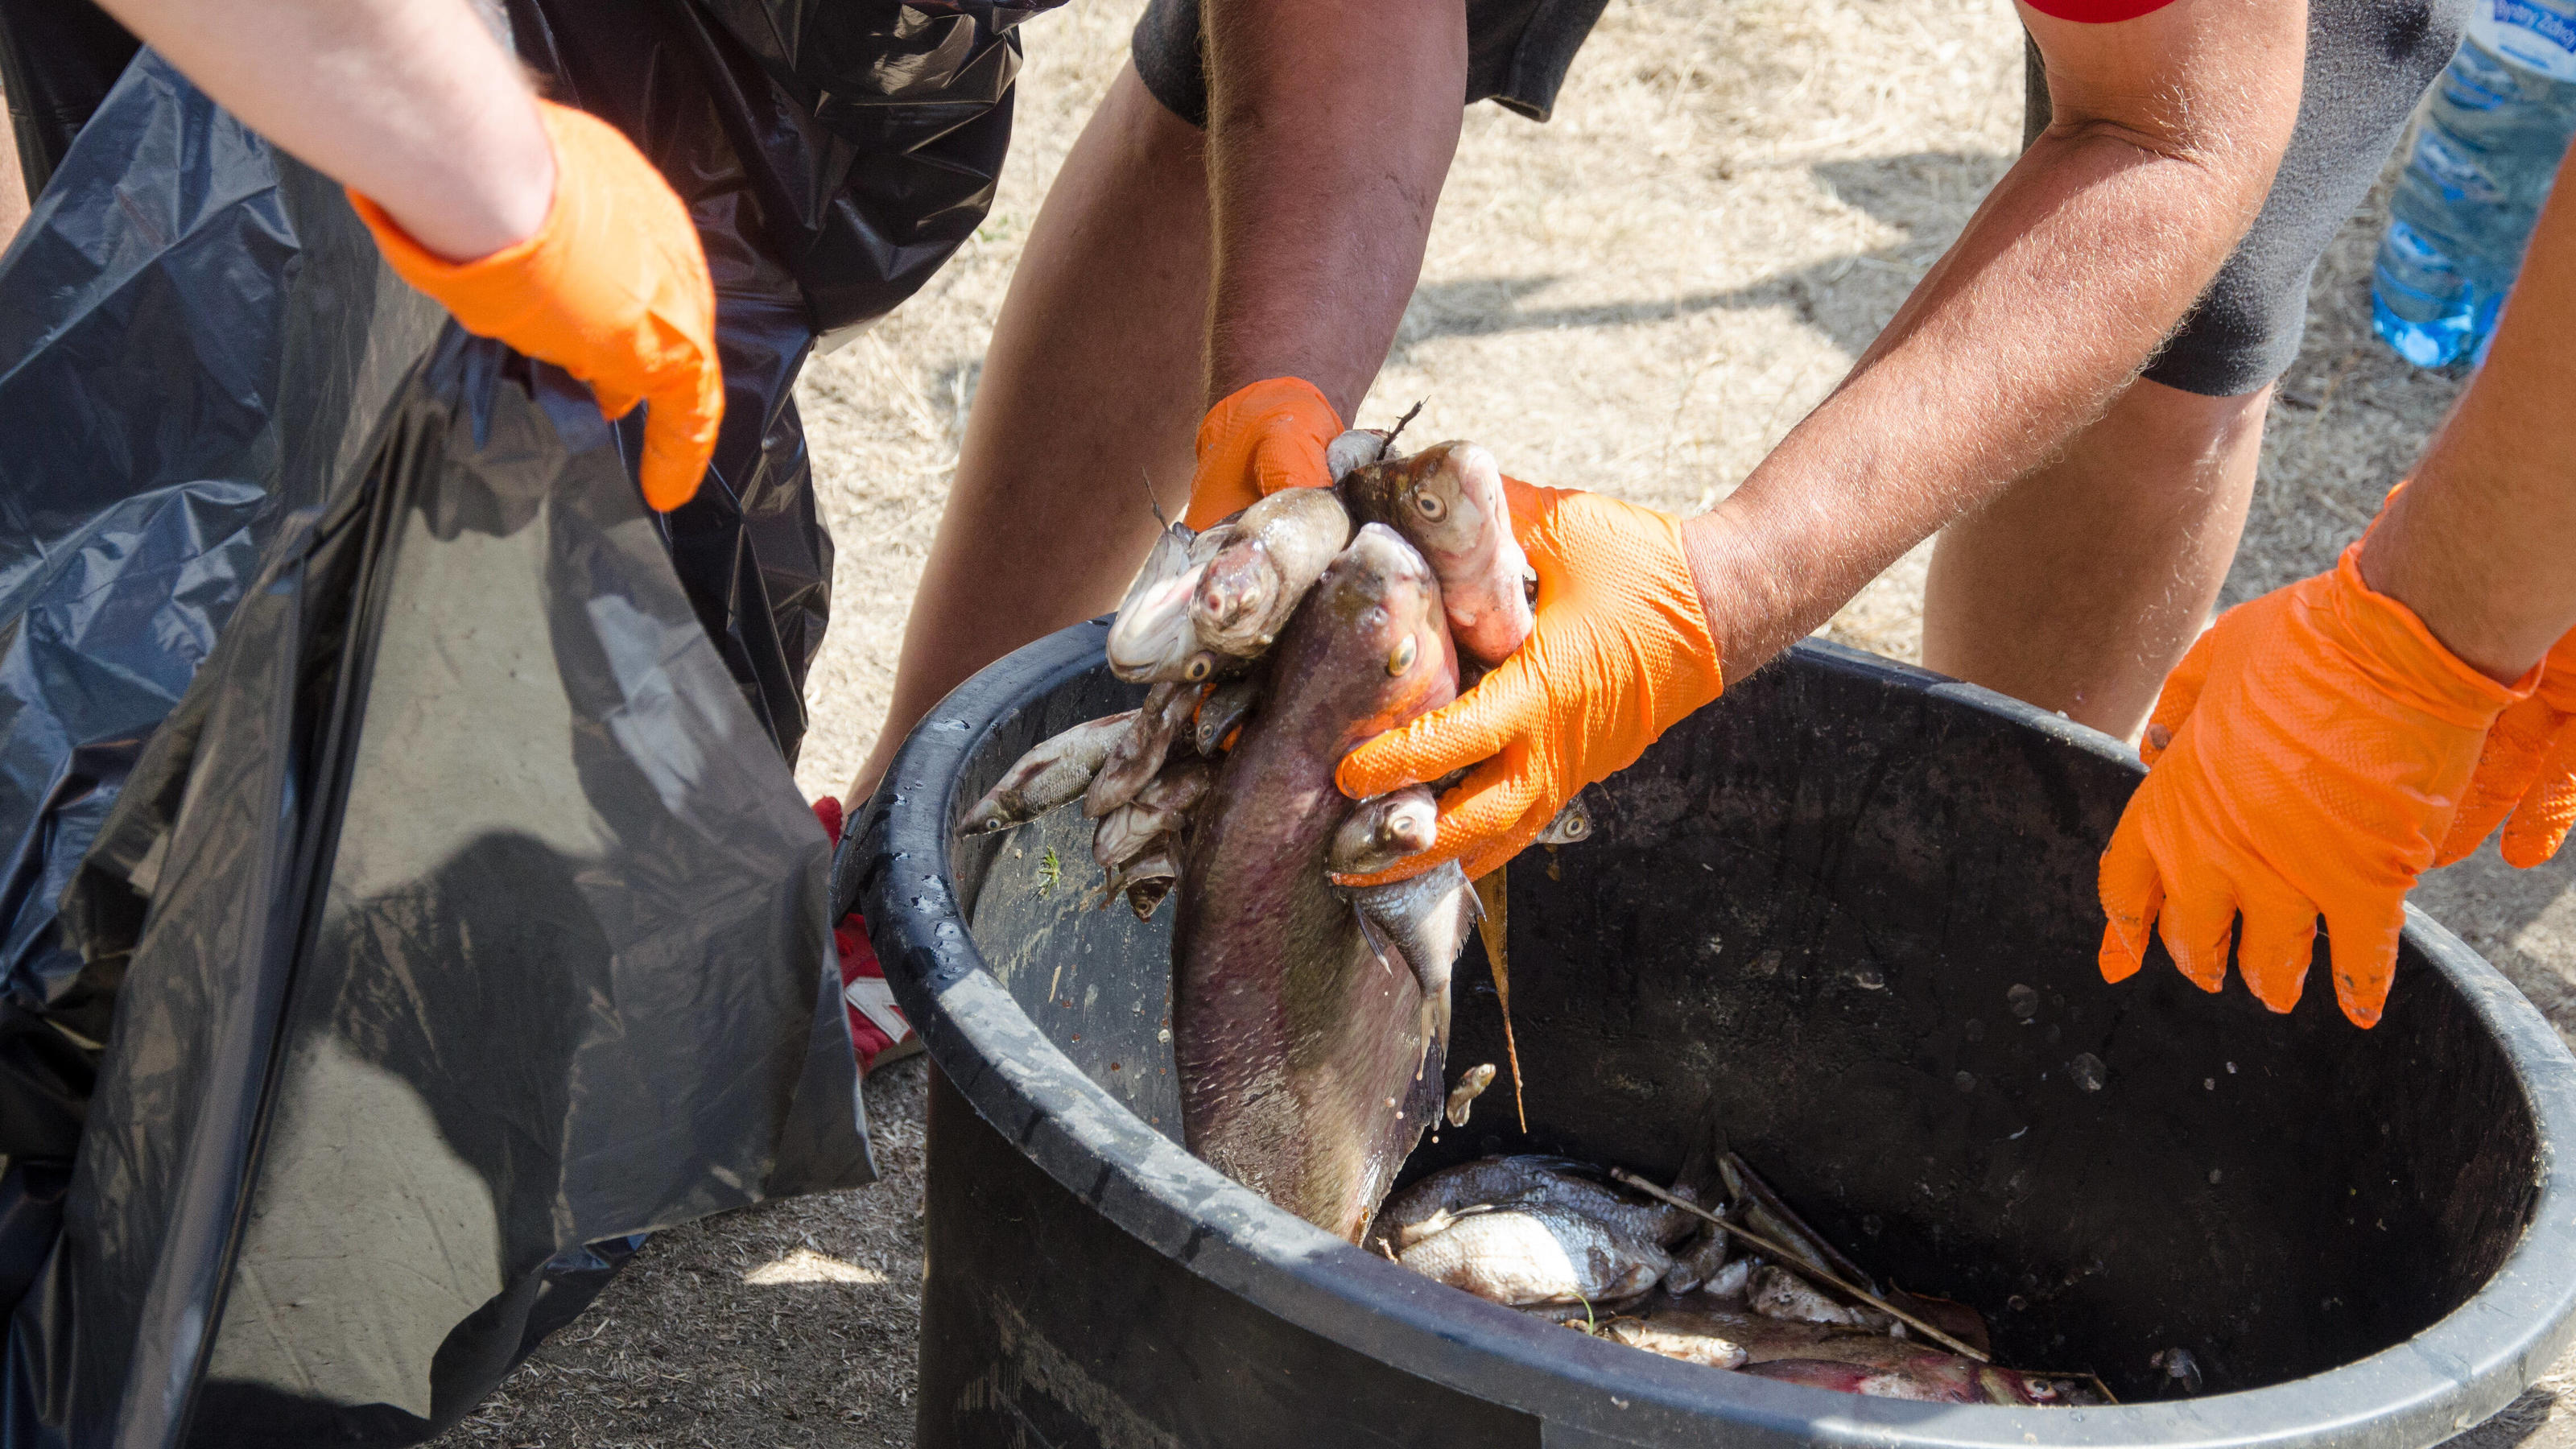  Thousands of dead fish in a river on a Polish-German border Photo: NewsLubuski/East News Members of National Fishing Guard pick up dead fish from the Oder river near Krosno Odrzanskie on August 10, 2022 in western Poland near the German border. In r